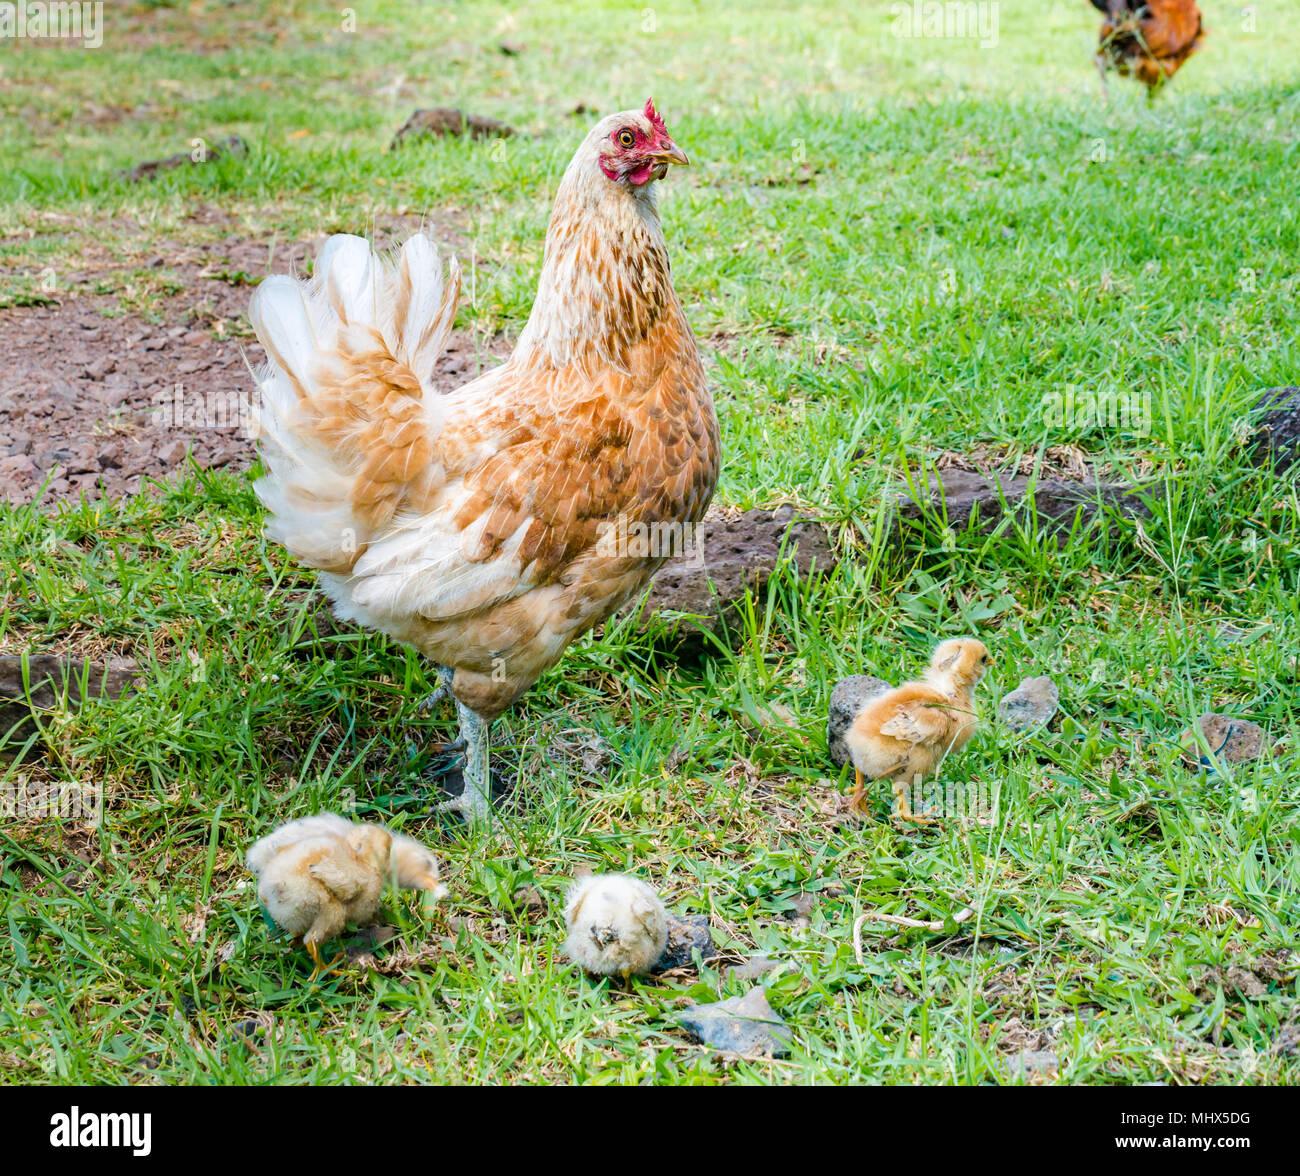 Domestic farmyard chickens, Easter Island, Chile. Female chicken with chicks feeding on the ground Stock Photo